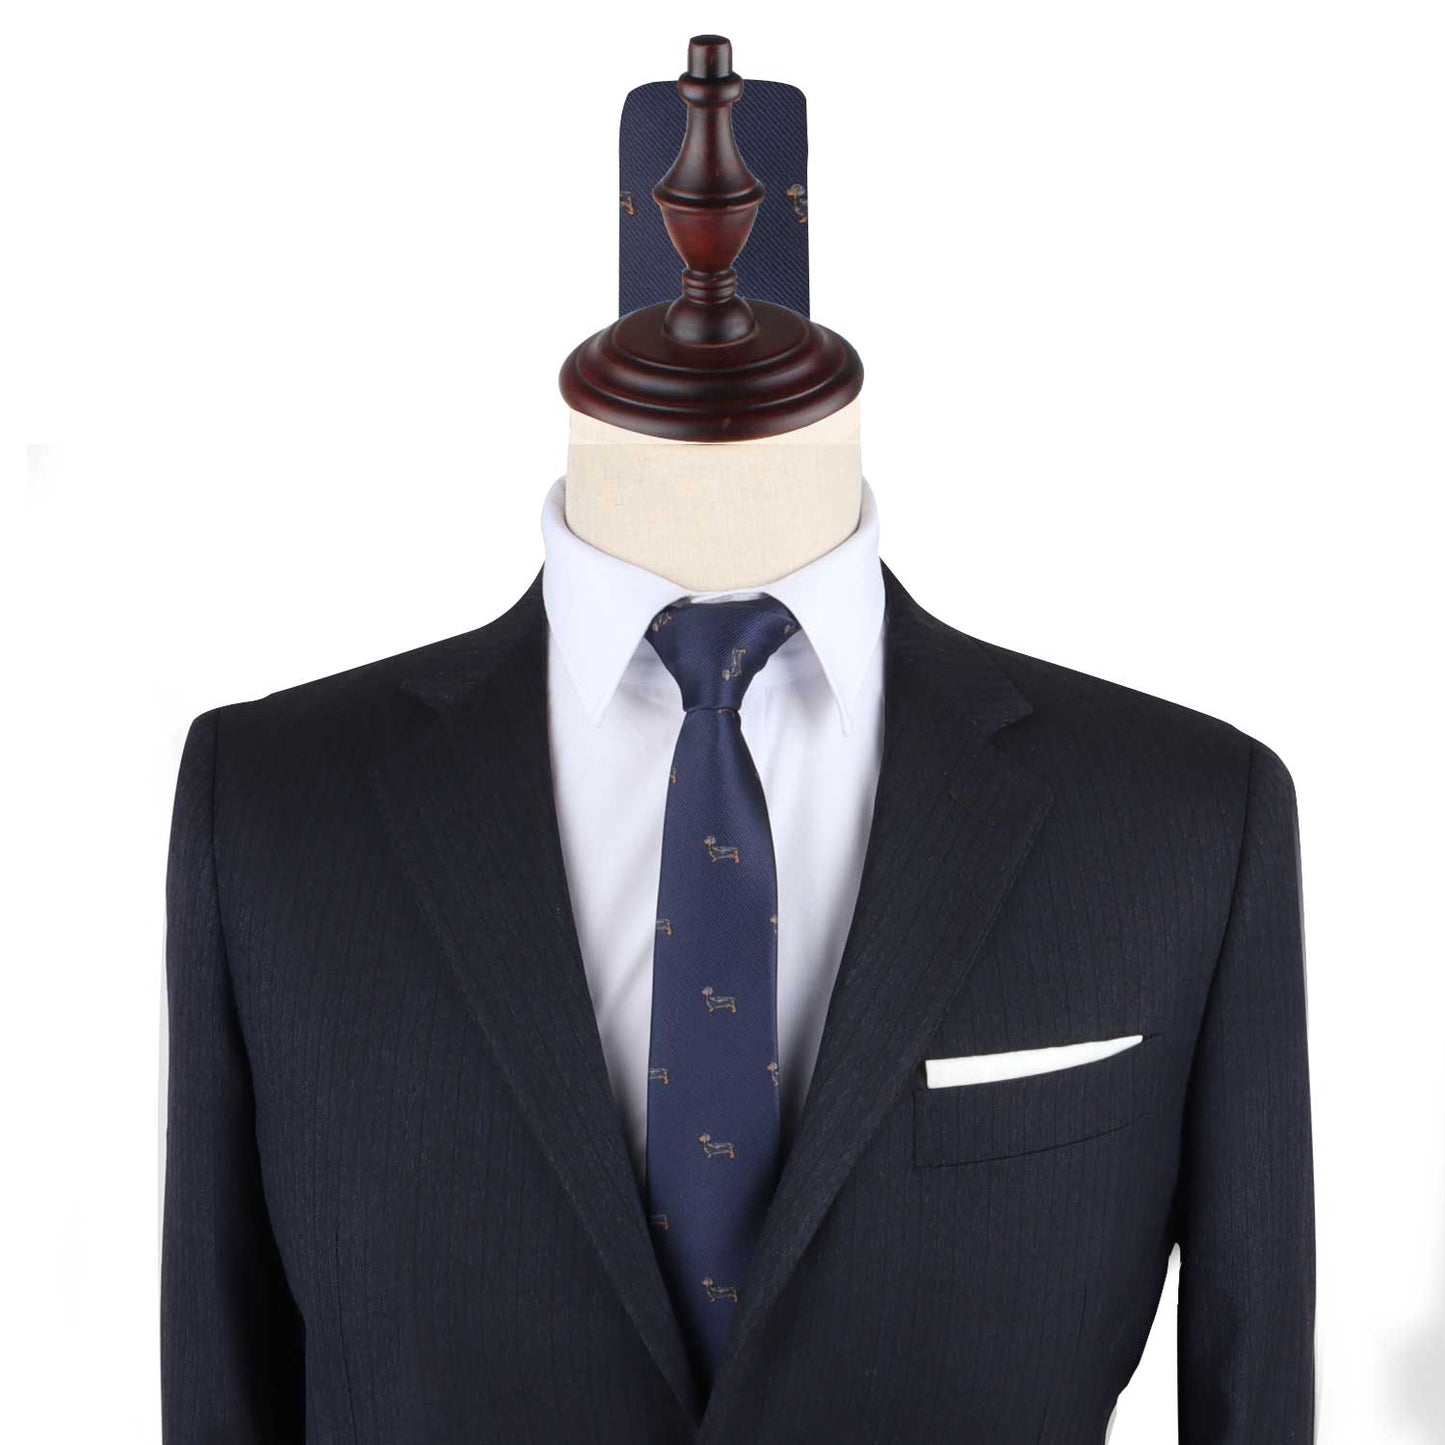 A Sausage Dog Skinny Tie exuding quirky charm on a mannequin dummy.